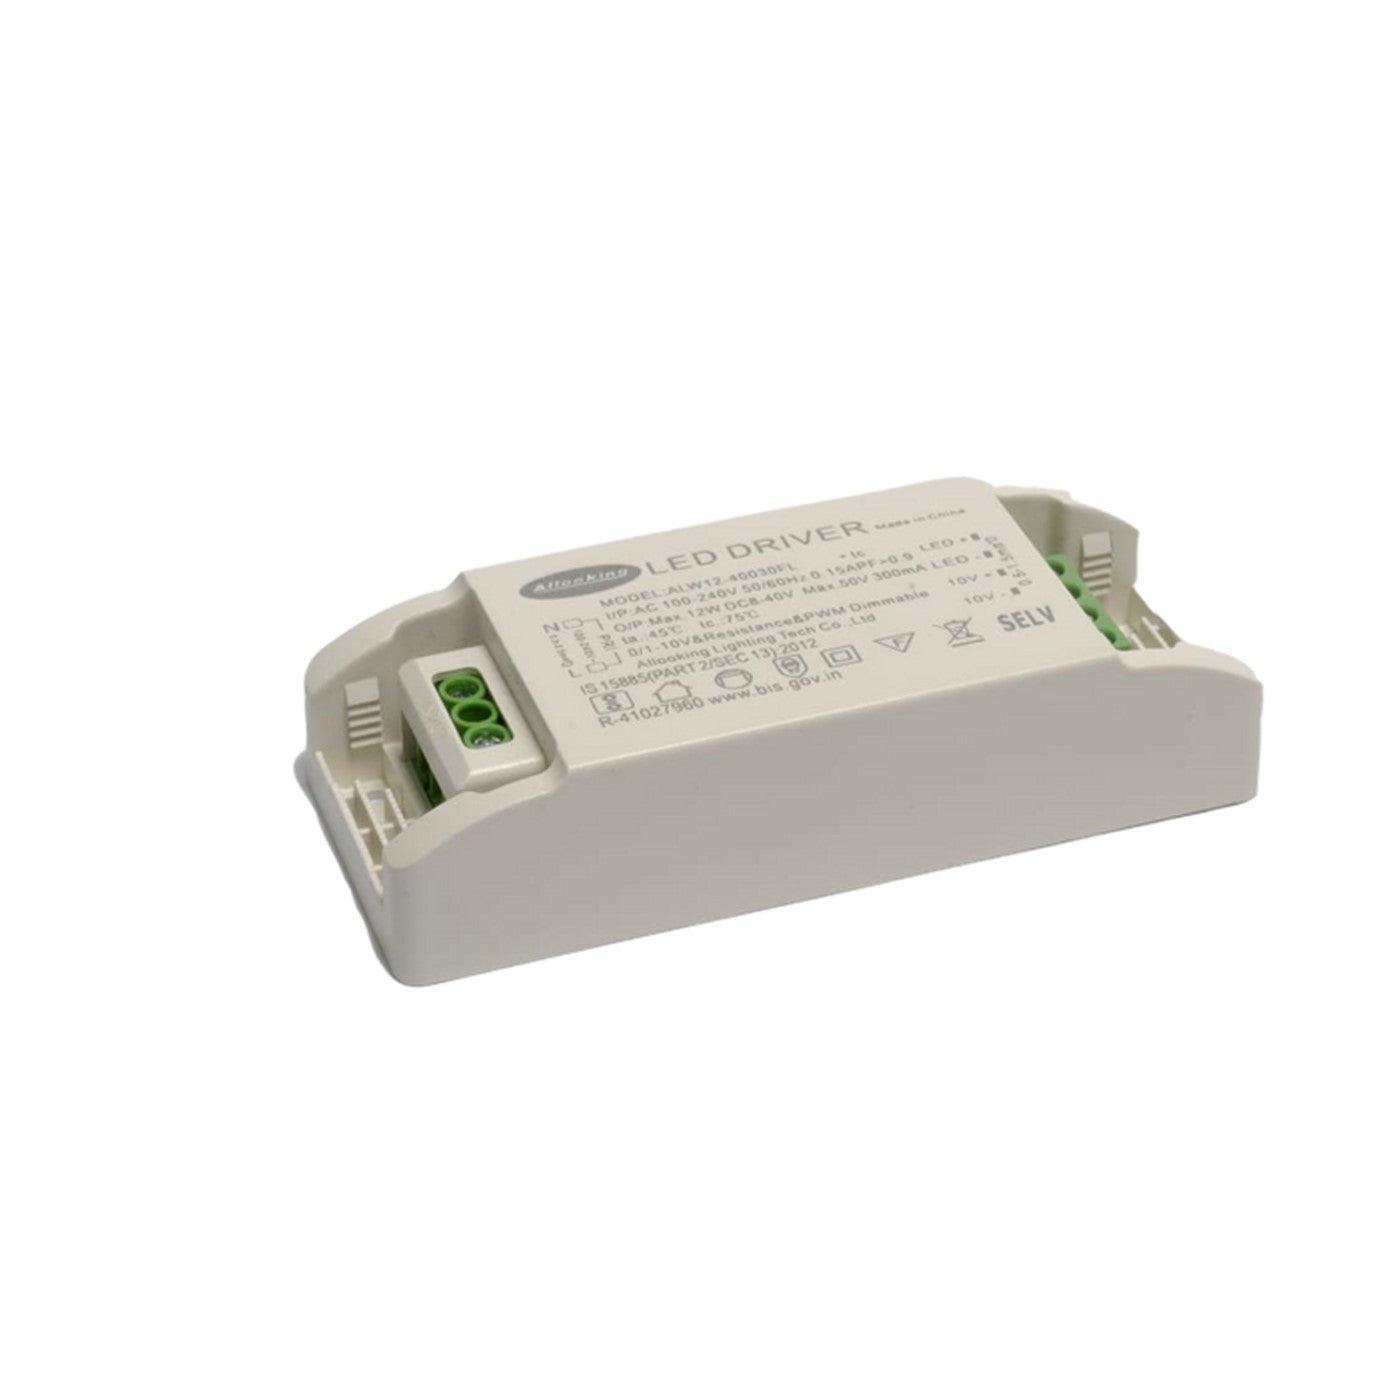 Allooking 30-40v 800ma 35W Constant Current Analogue Dimmable Driver